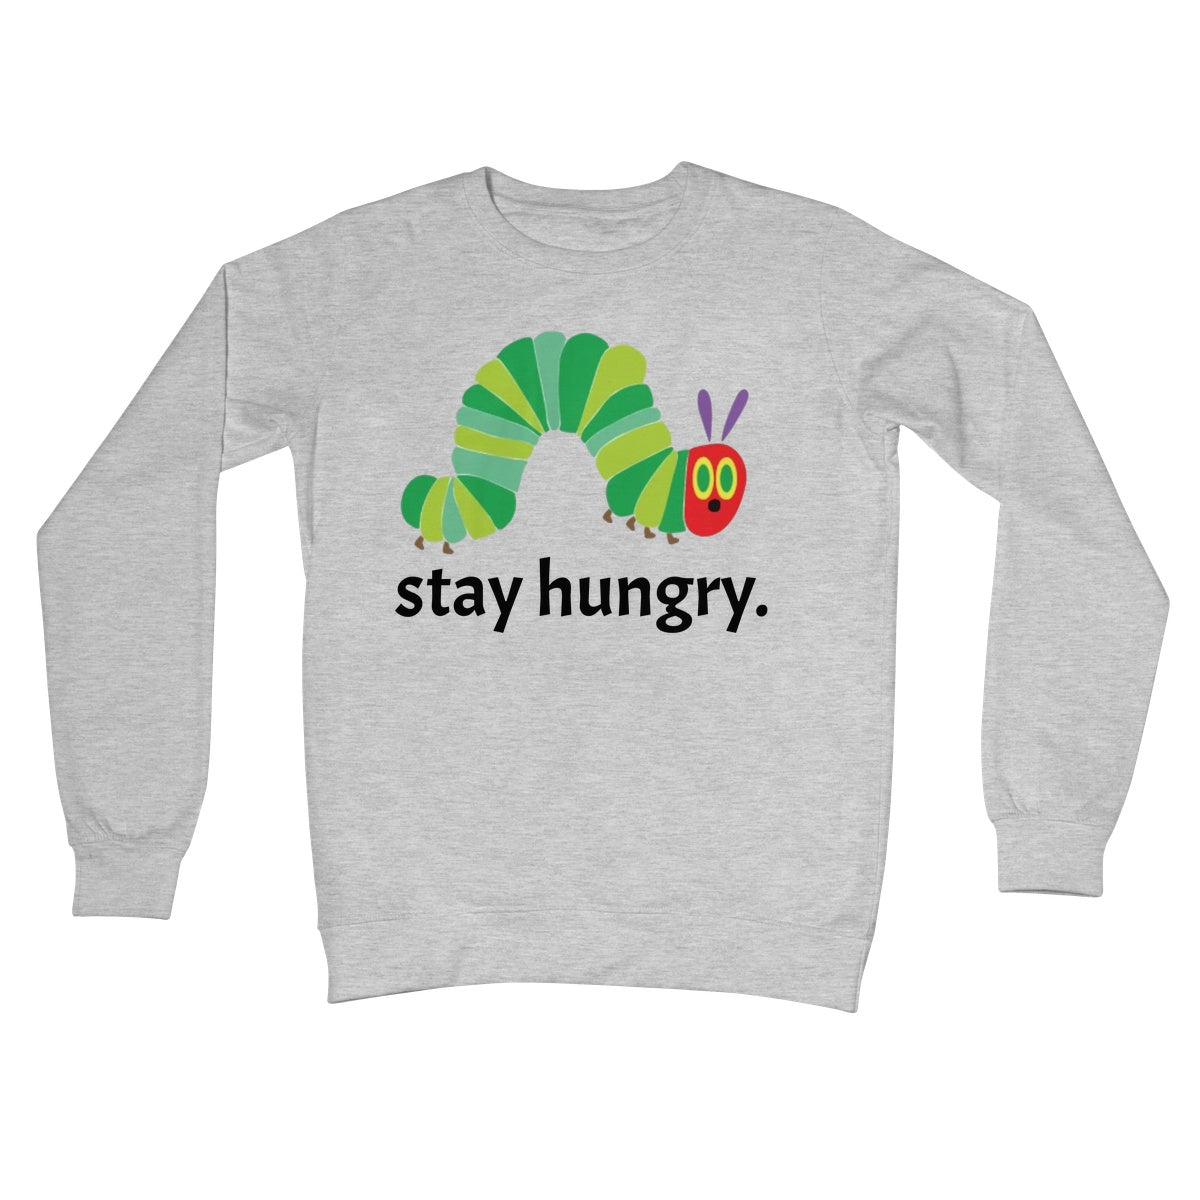 stay hungry jumper light grey